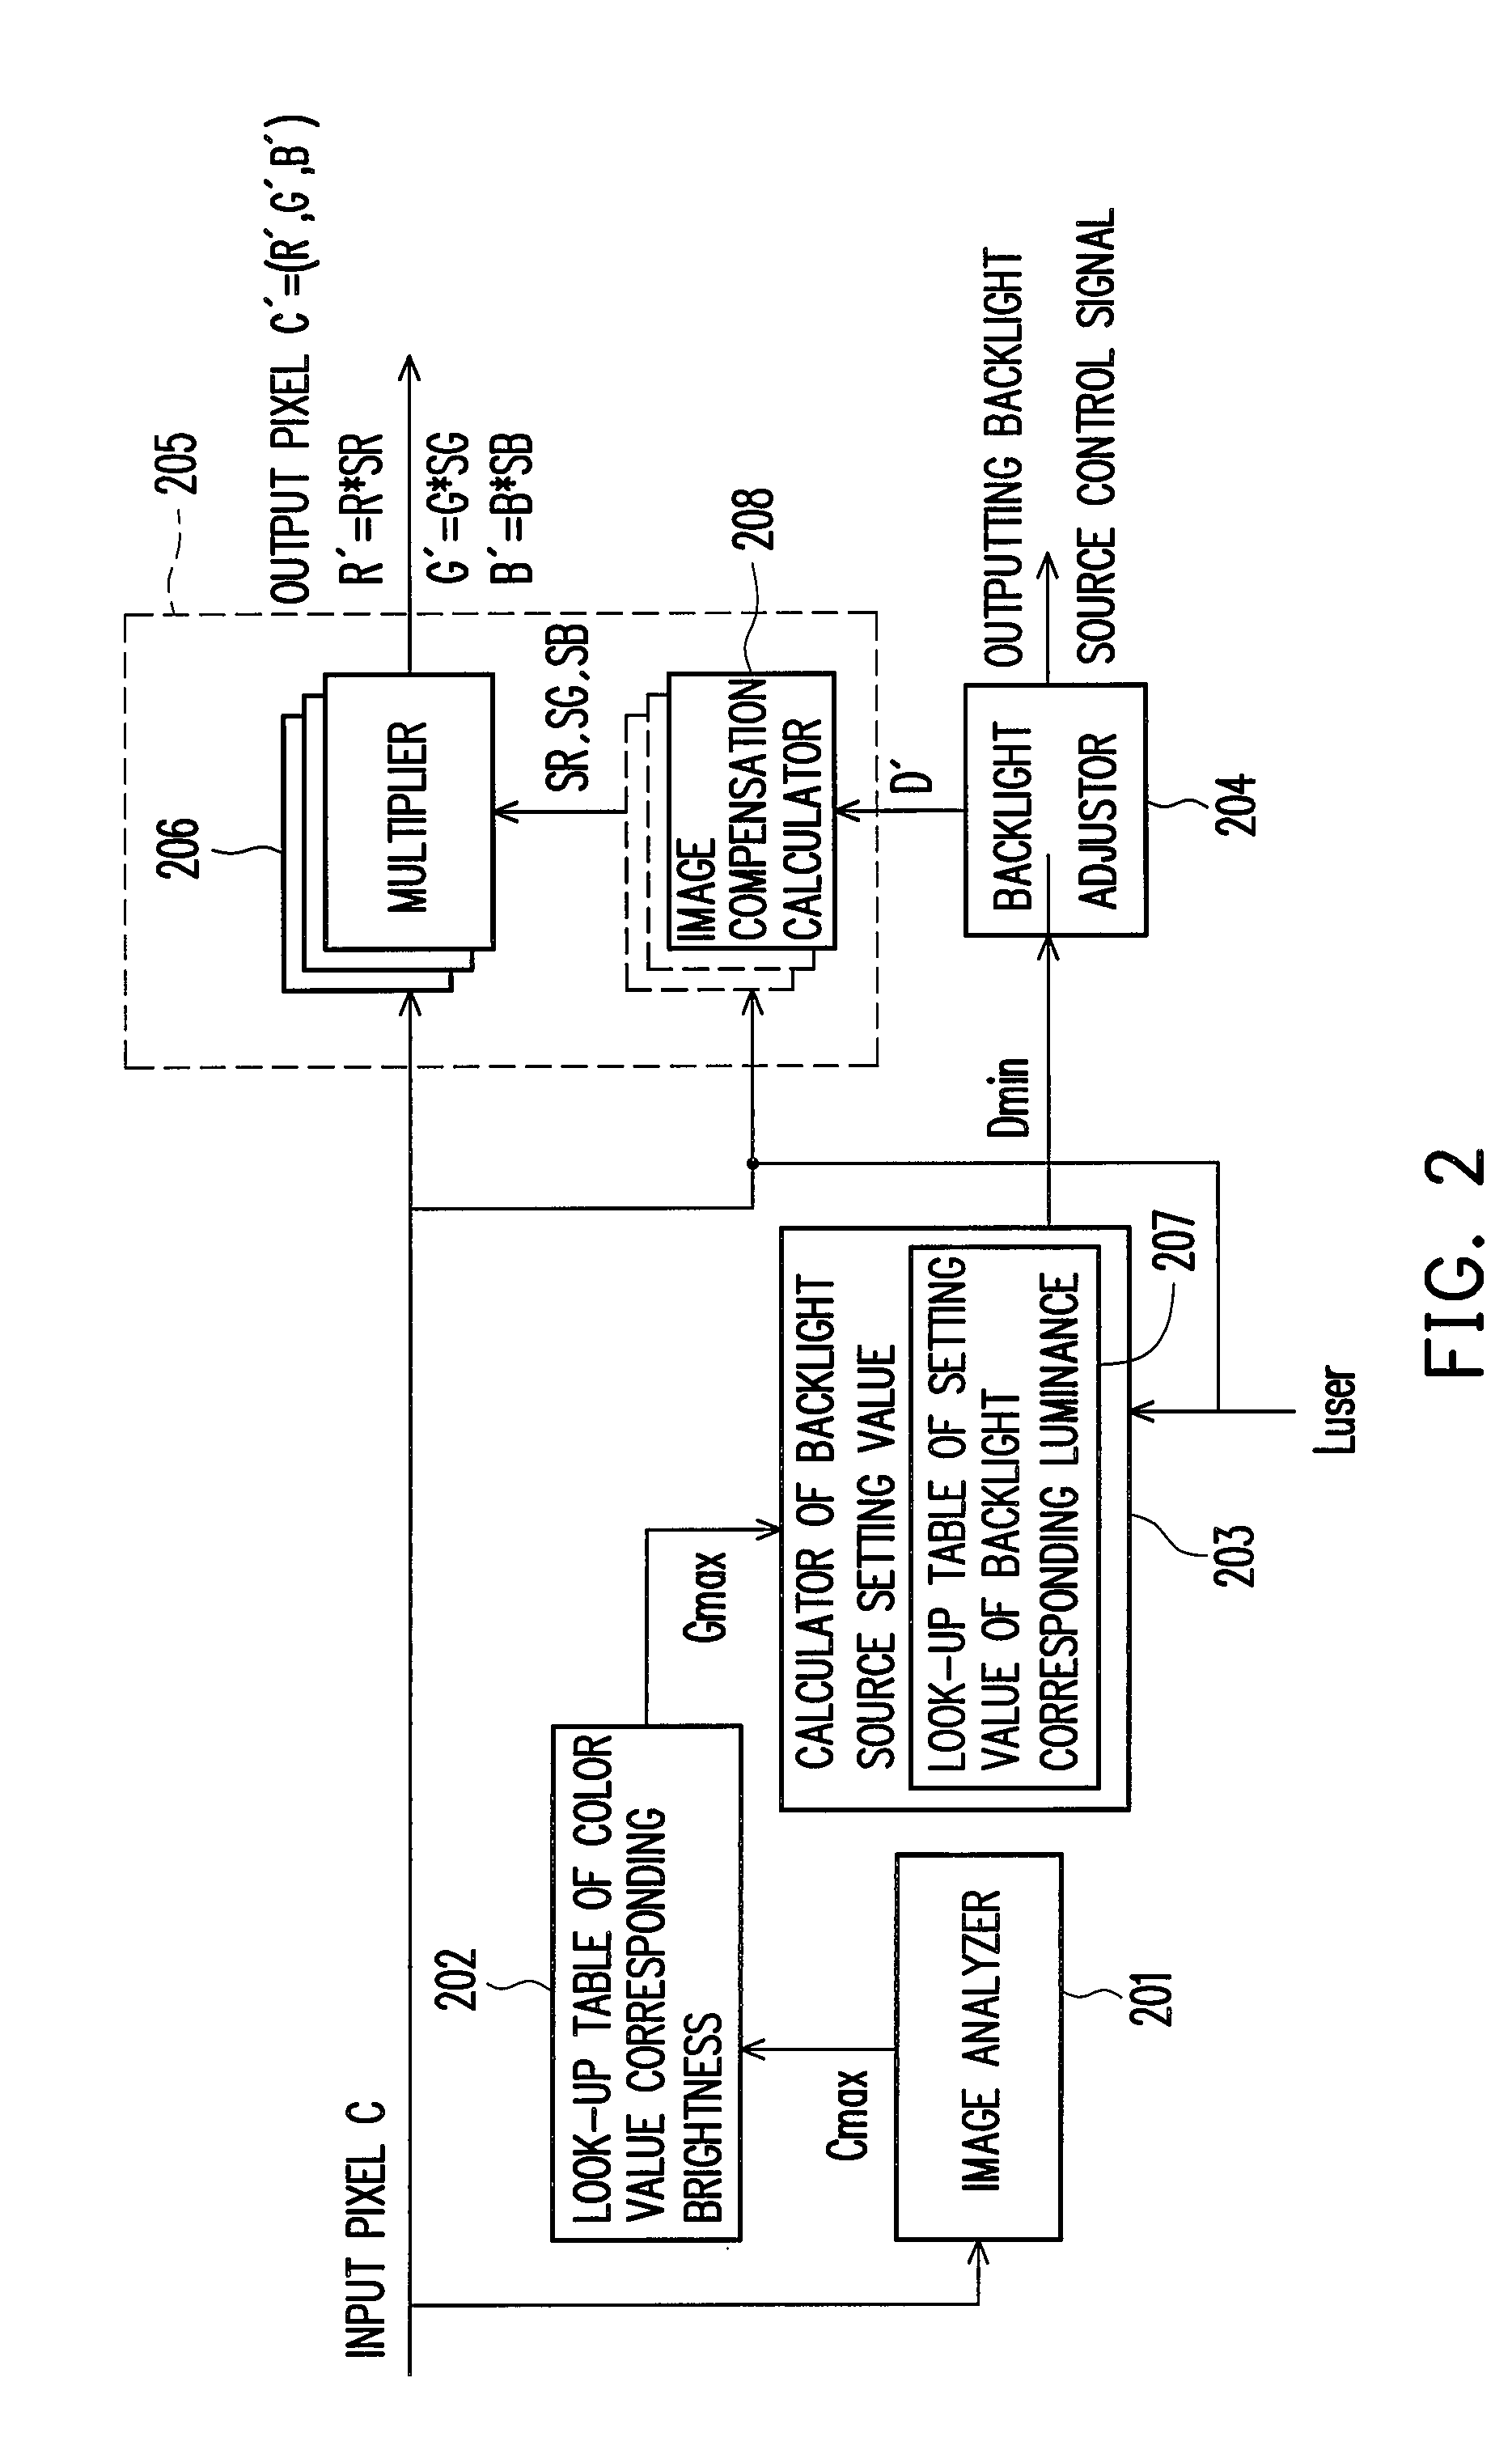 Apparatus and method for controlling display backlight